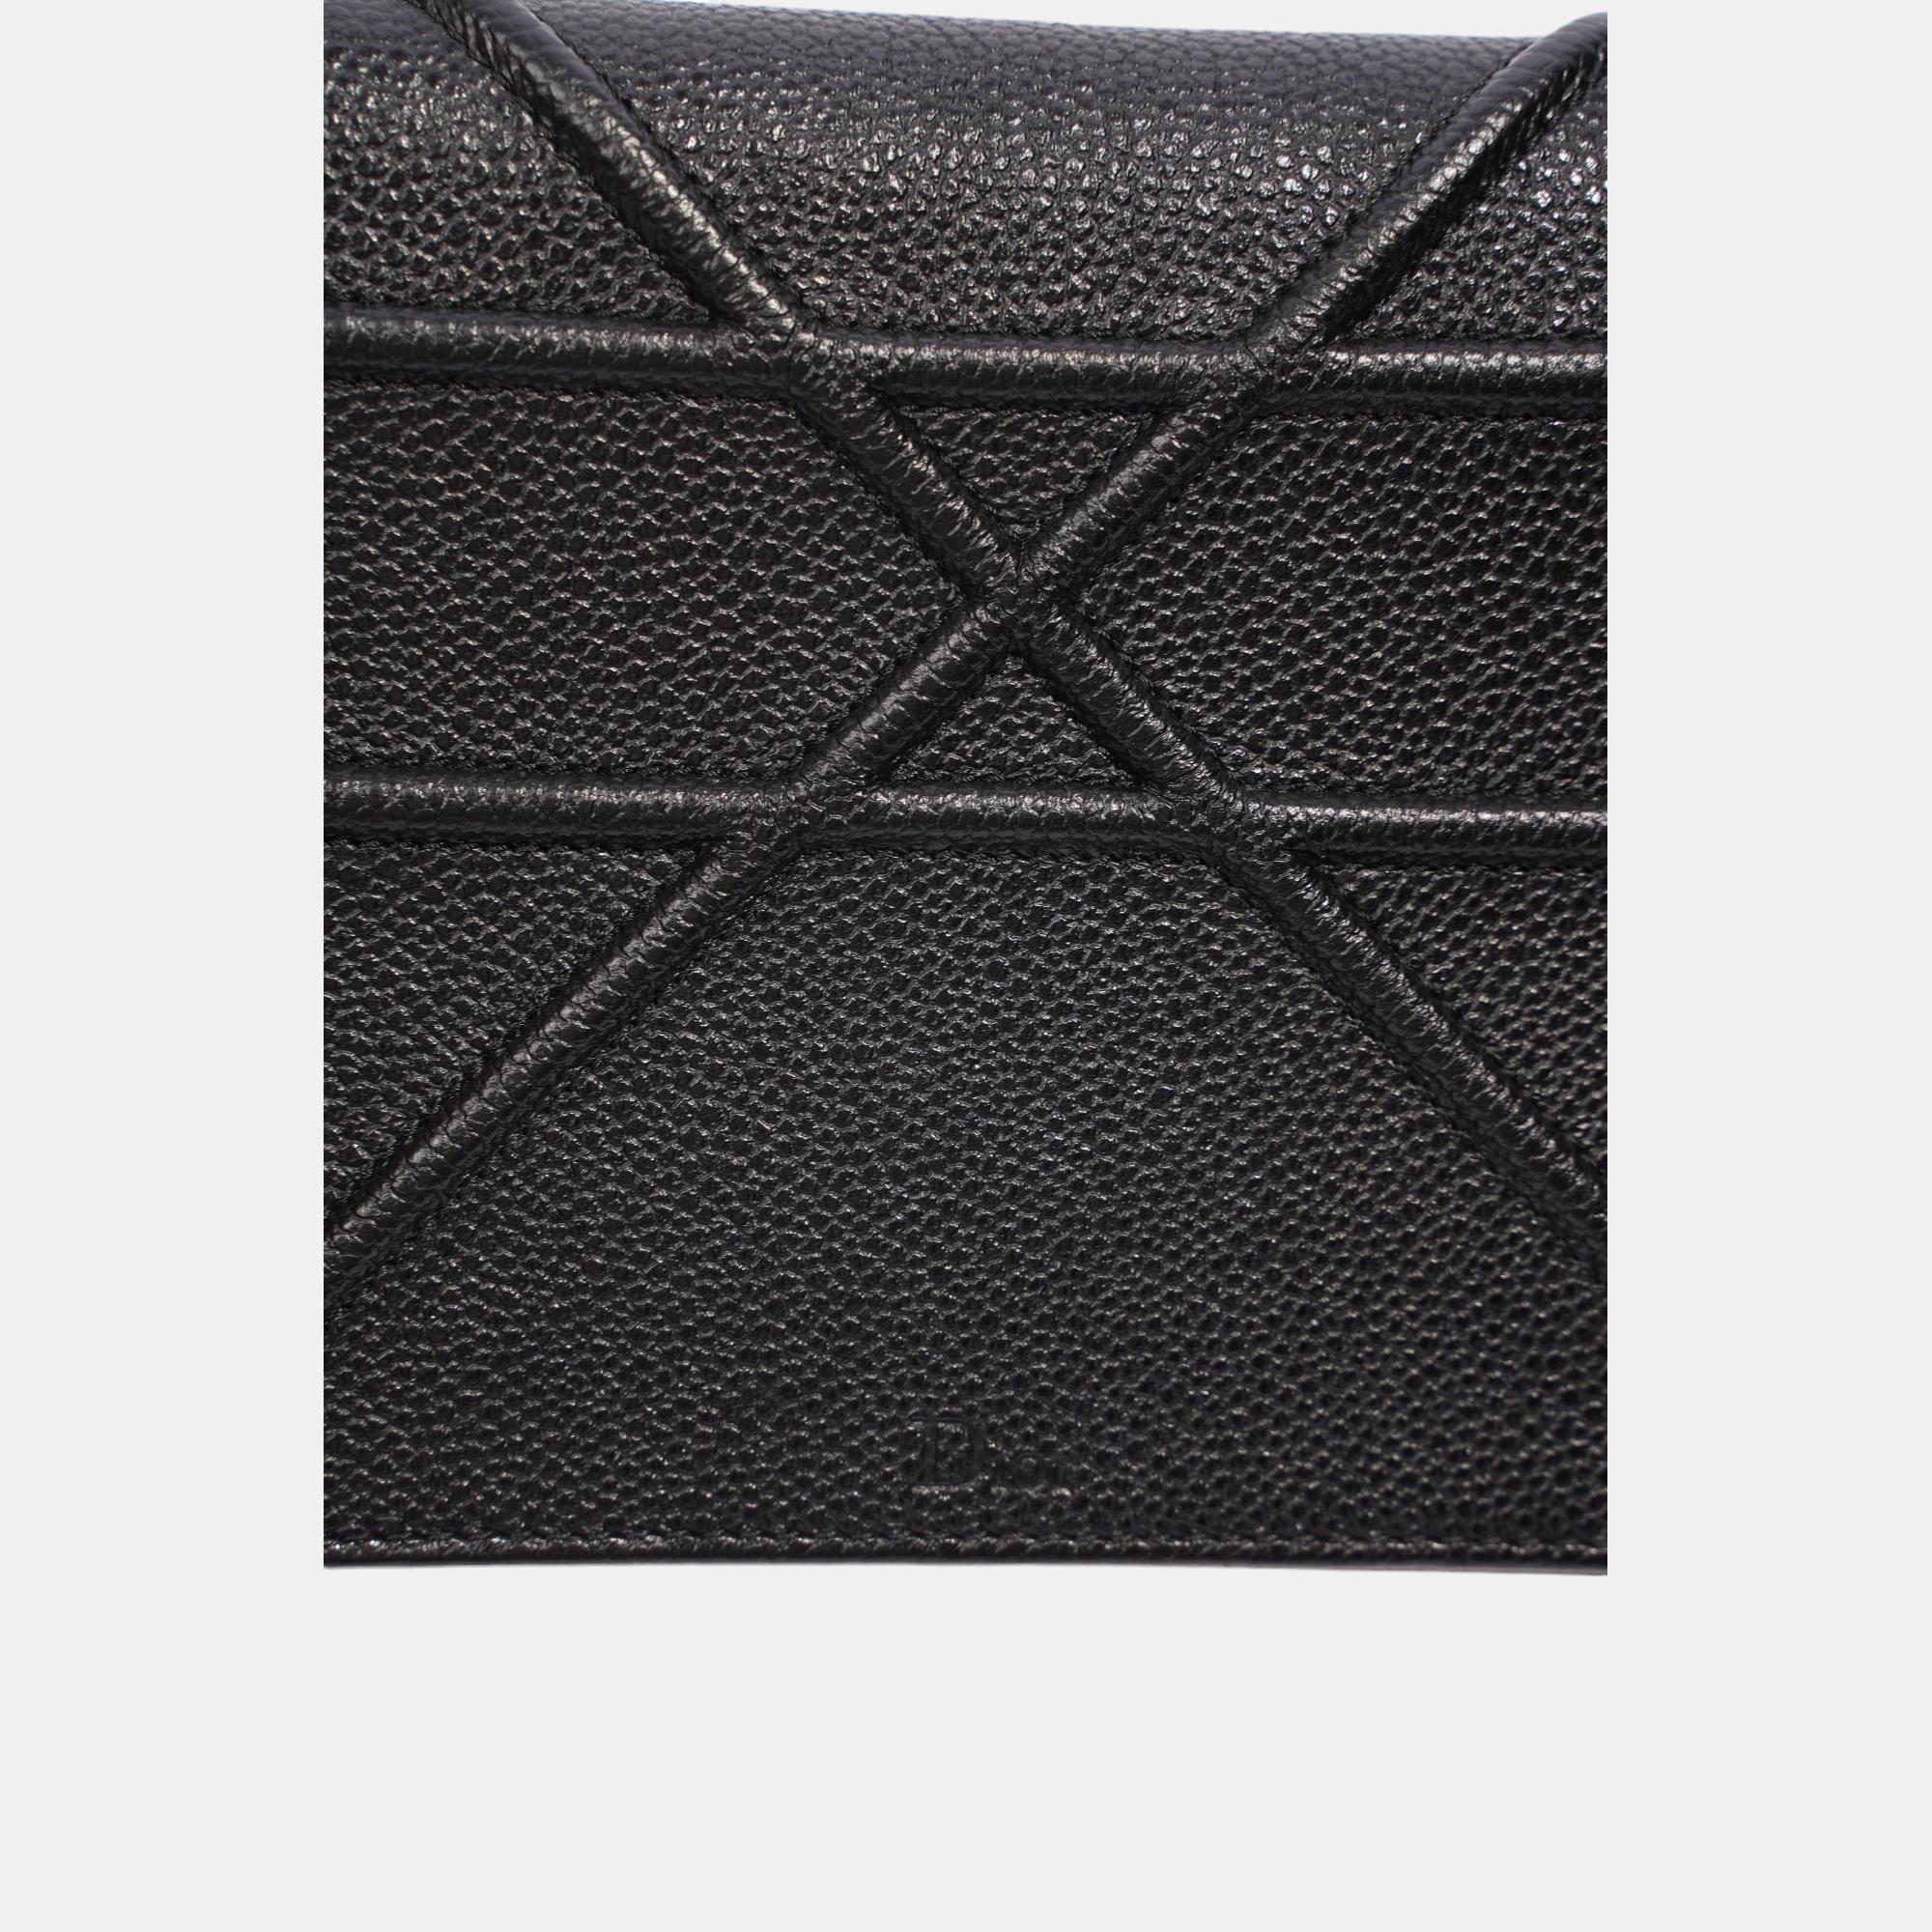 Christian Dior Diorama Wallet On Chain Black Leather